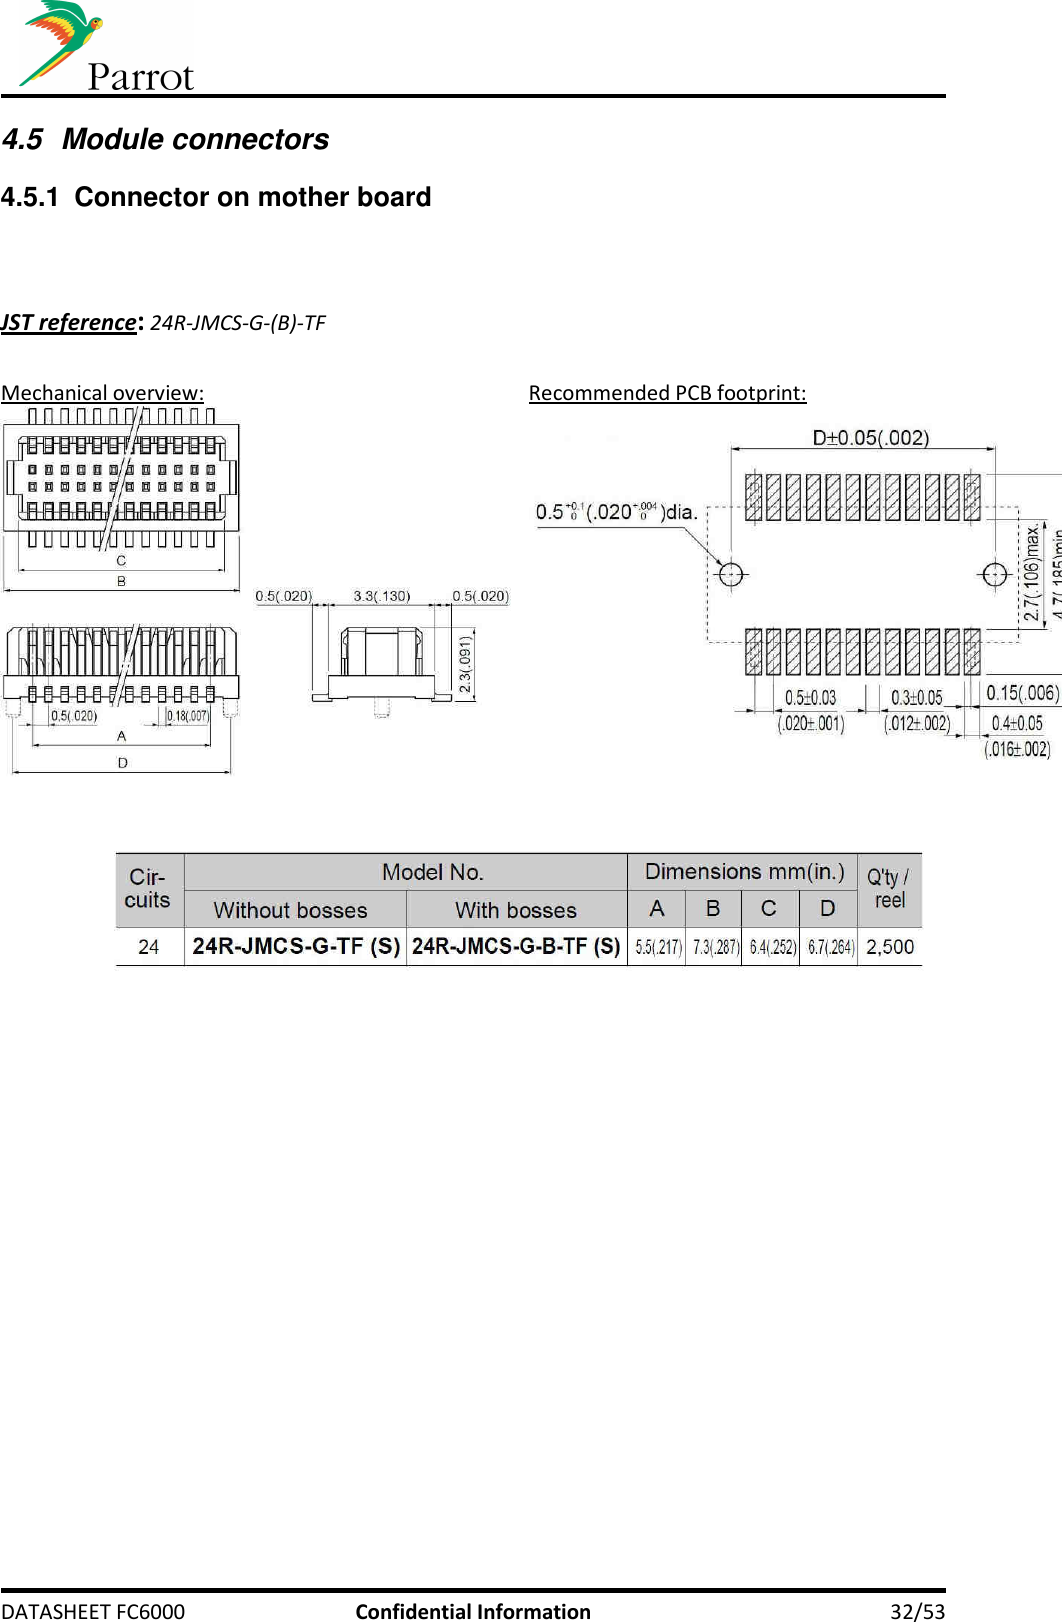     DATASHEET FC6000  Confidential Information  32/53 4.5  Module connectors 4.5.1  Connector on mother board    JST reference: 24R-JMCS-G-(B)-TF  Mechanical overview:  Recommended PCB footprint:      